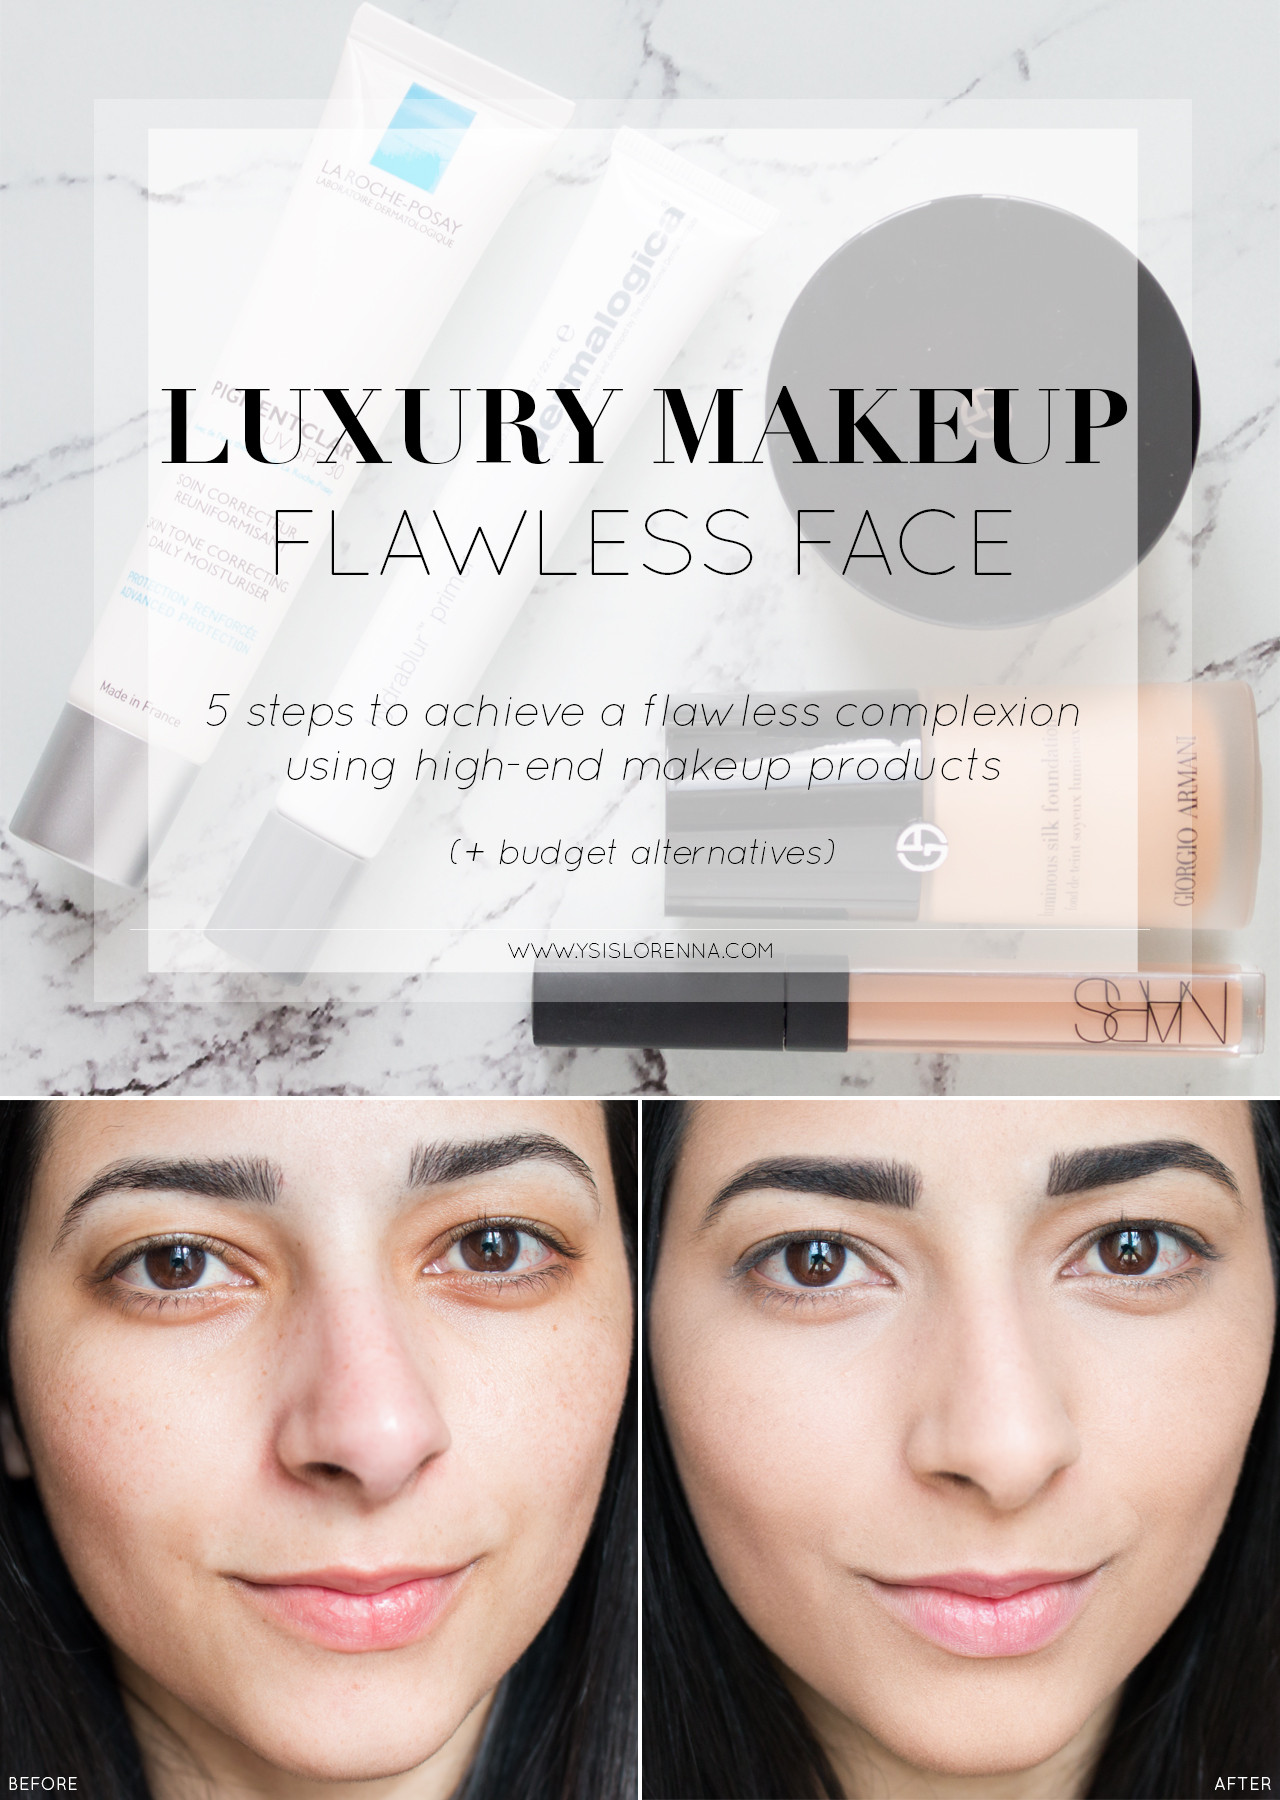 How To: Flawless Face with Luxury Makeup + Budget Alternatives - www.ysislorenna.com